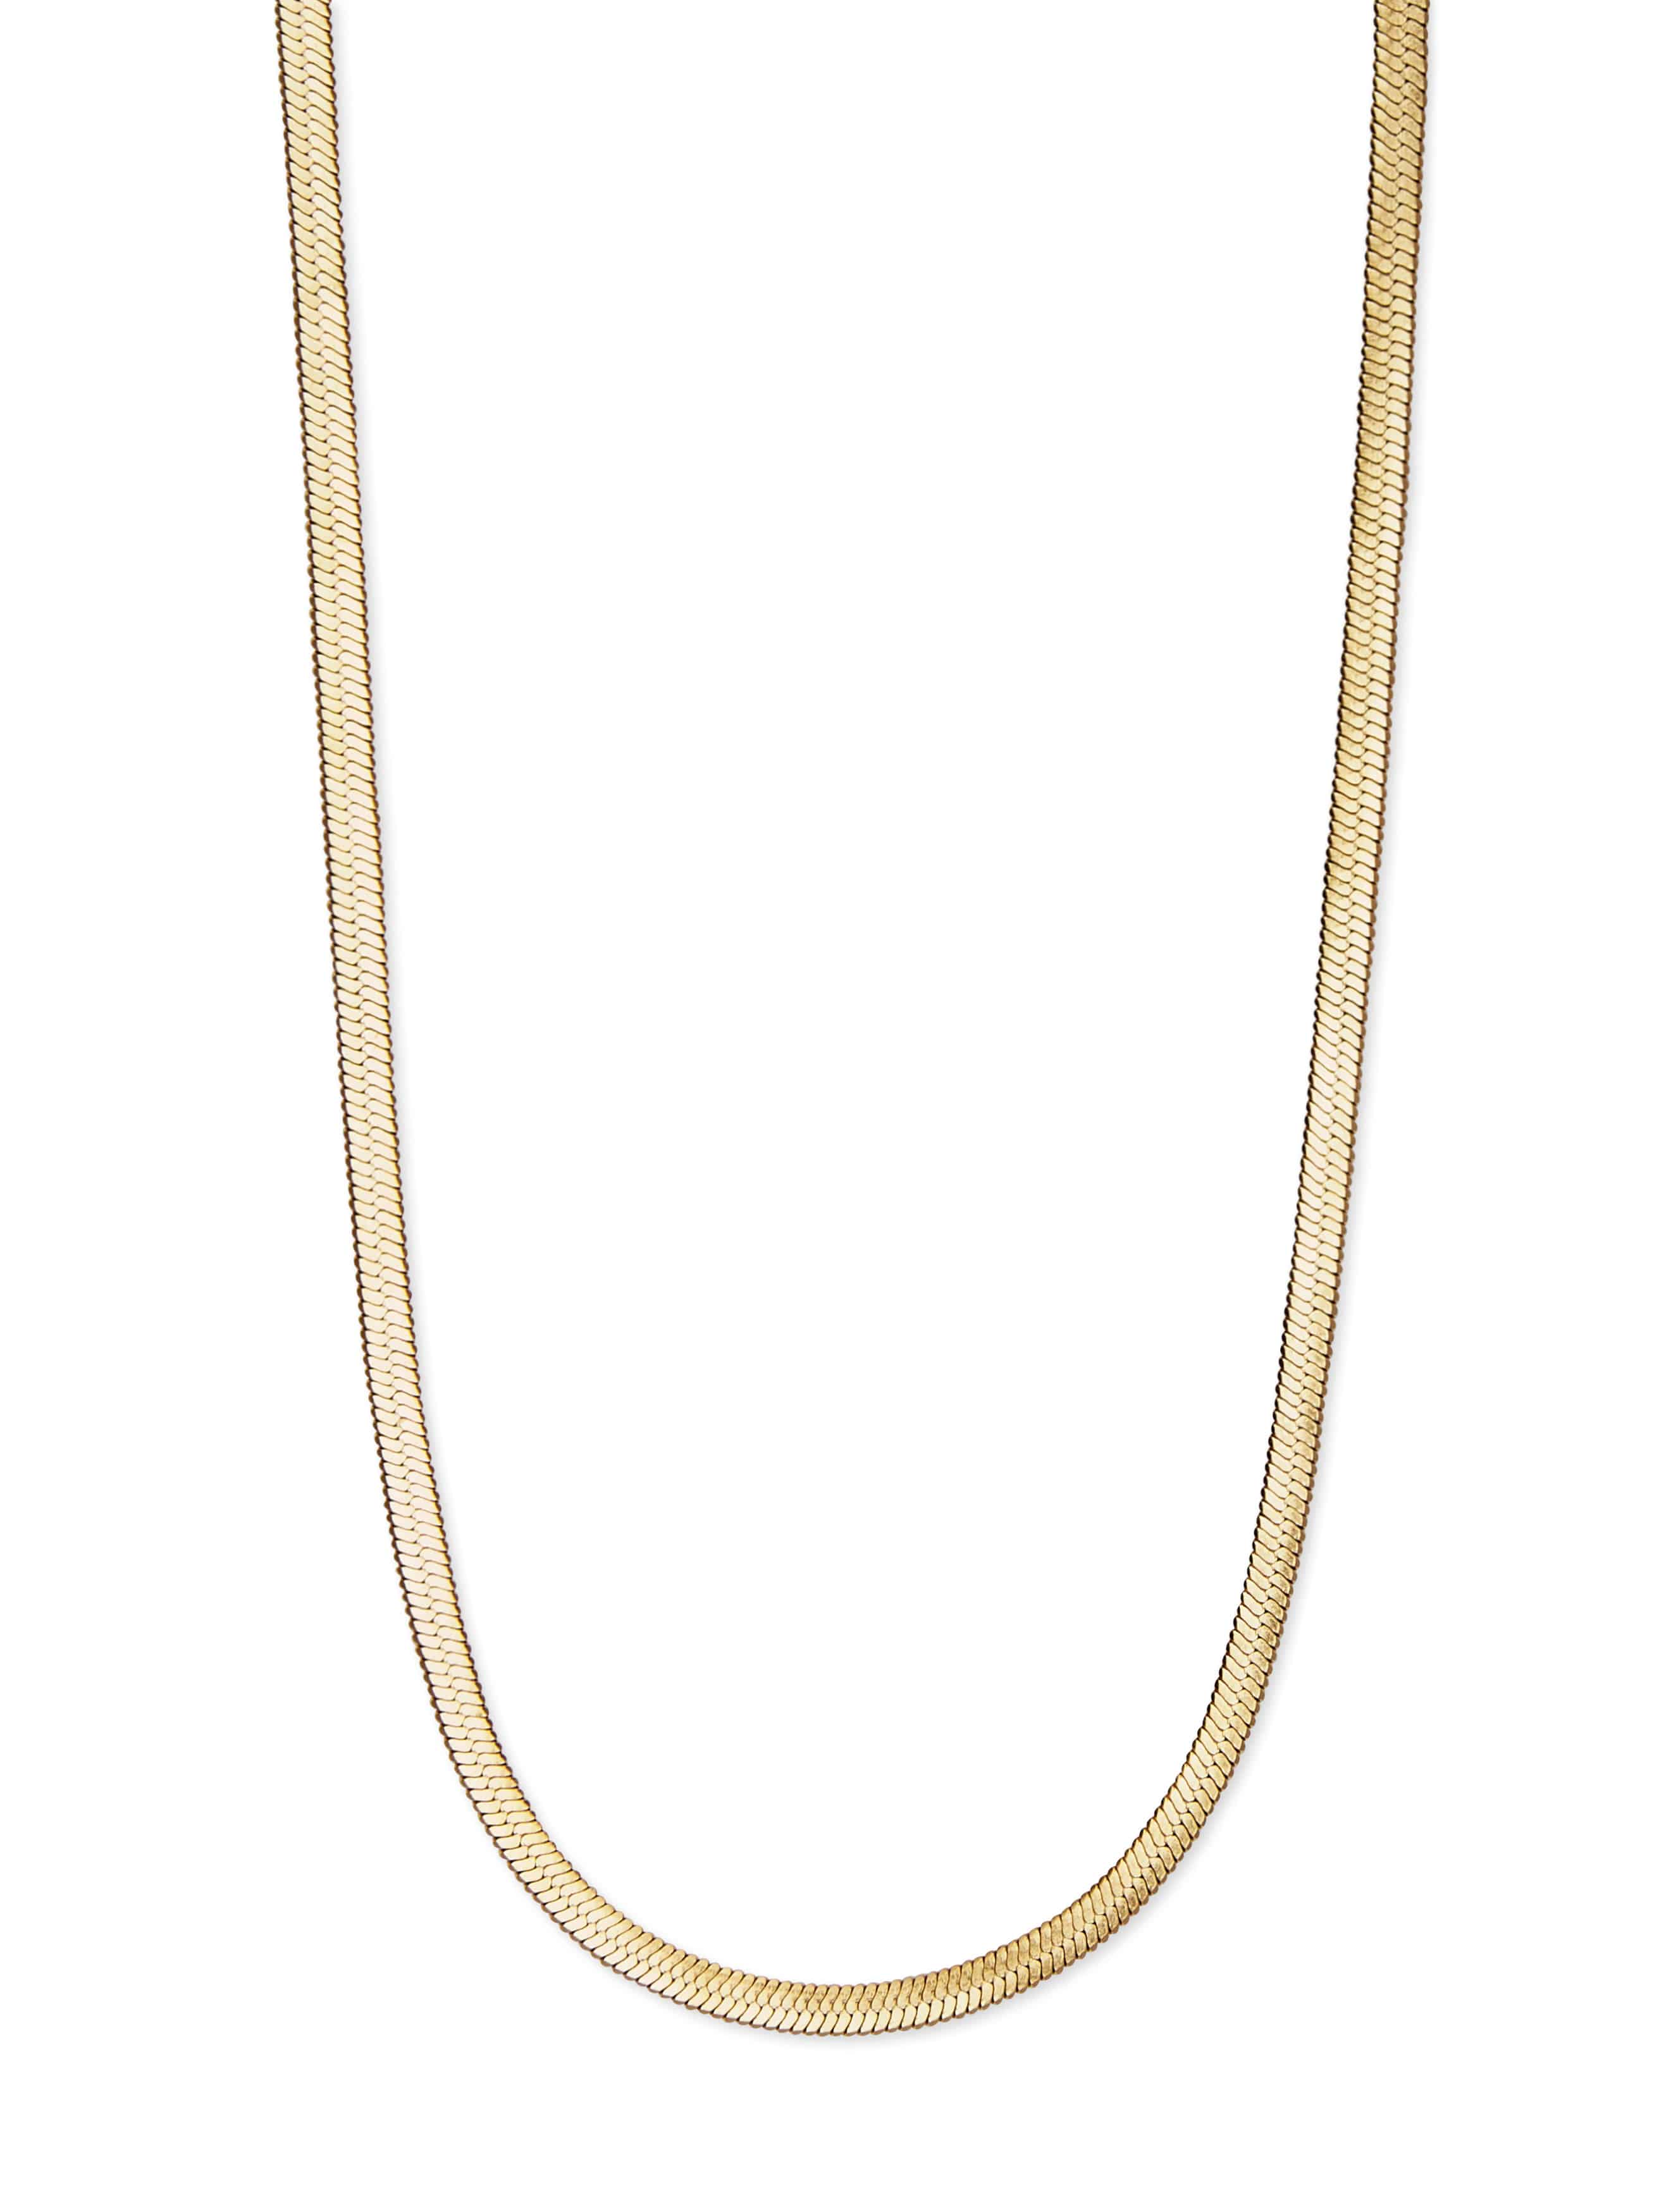 Buy Pipa Bella by Nykaa Fashion Gold-Plated Flat Snake Chain online